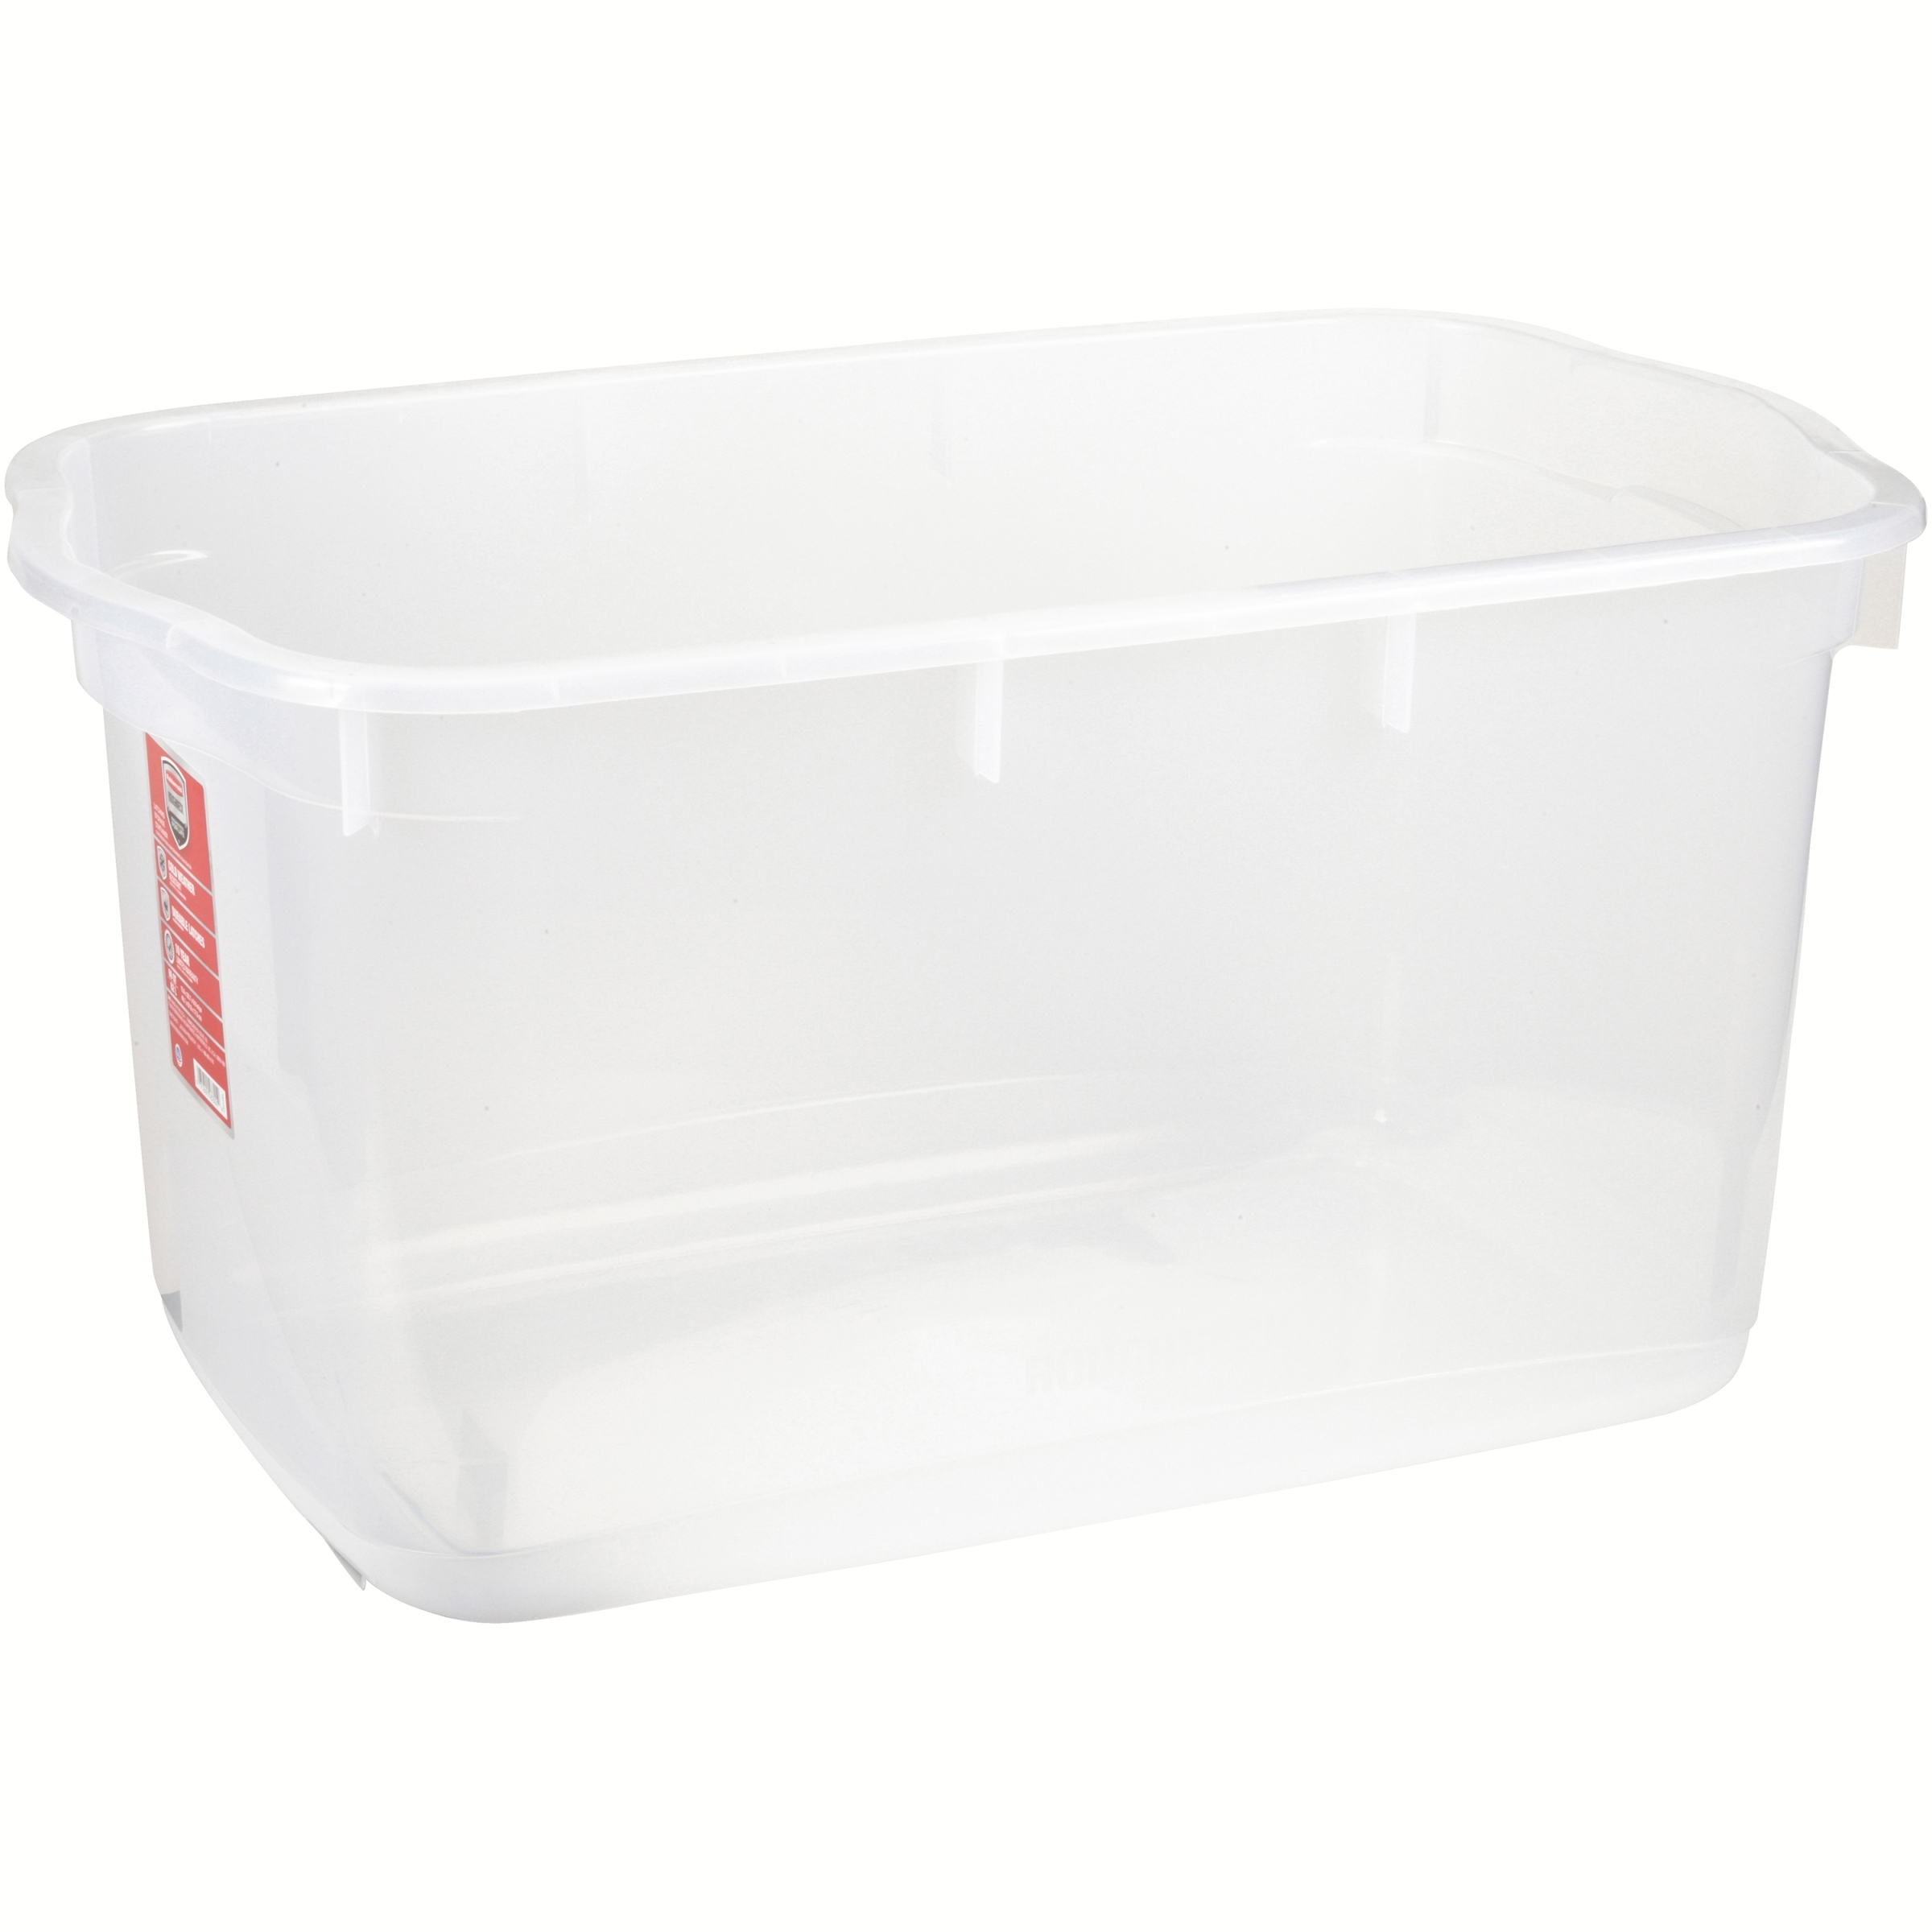 Rubbermaid Roughneck 66 Qt. (16.5 Gal) Clear Storage Tote Bin, Clear with Blue Lid - image 2 of 3